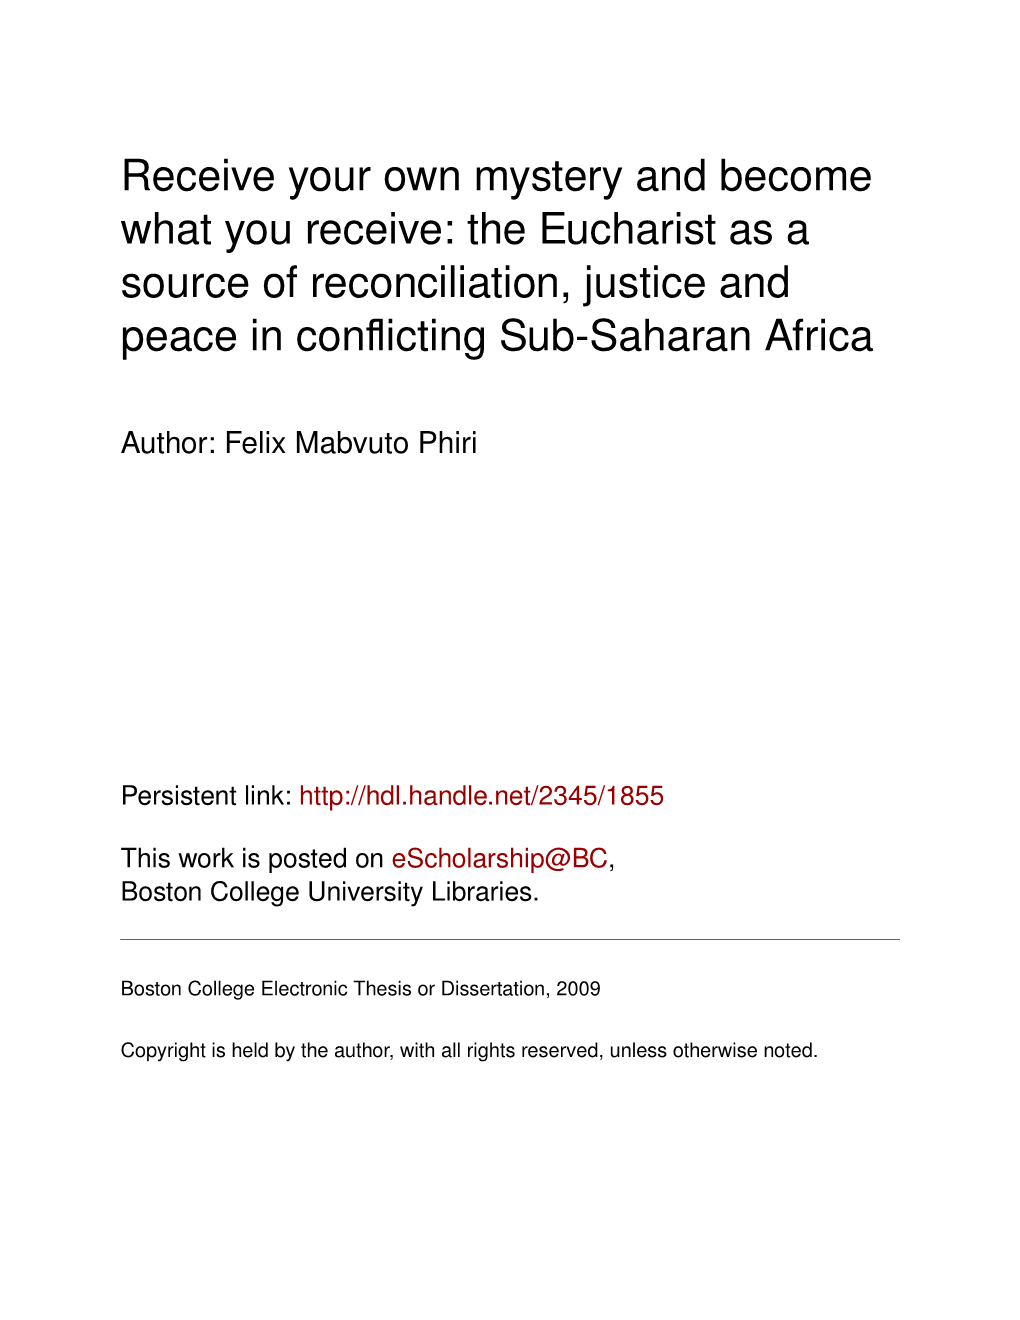 The Eucharist As a Source of Reconciliation, Justice and Peace in Conﬂicting Sub-Saharan Africa